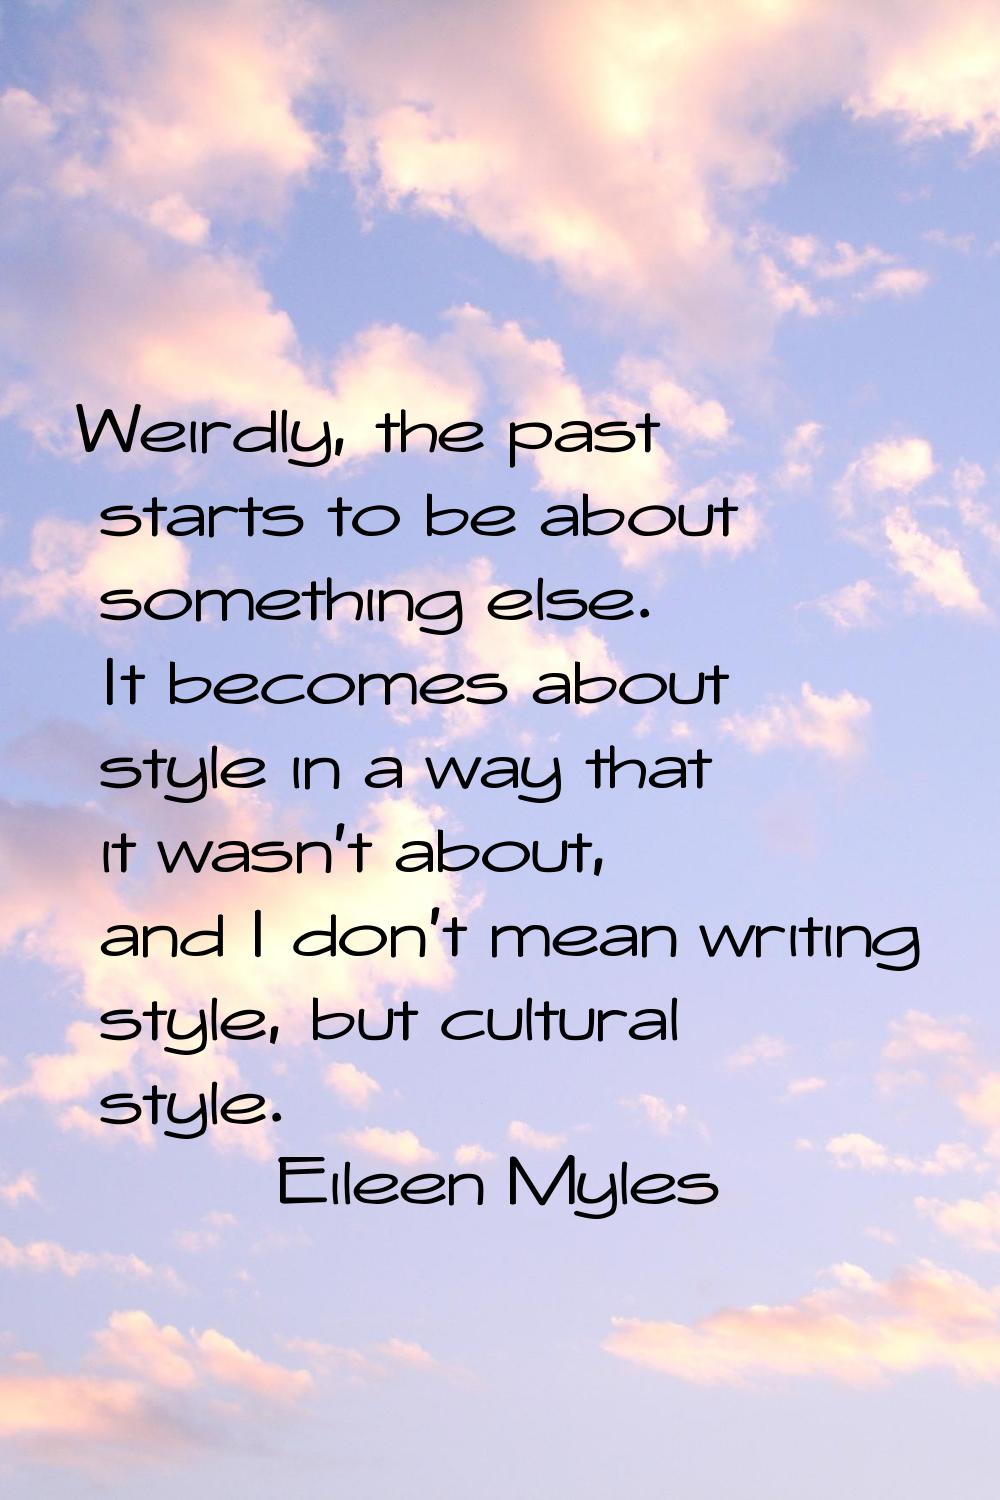 Weirdly, the past starts to be about something else. It becomes about style in a way that it wasn't